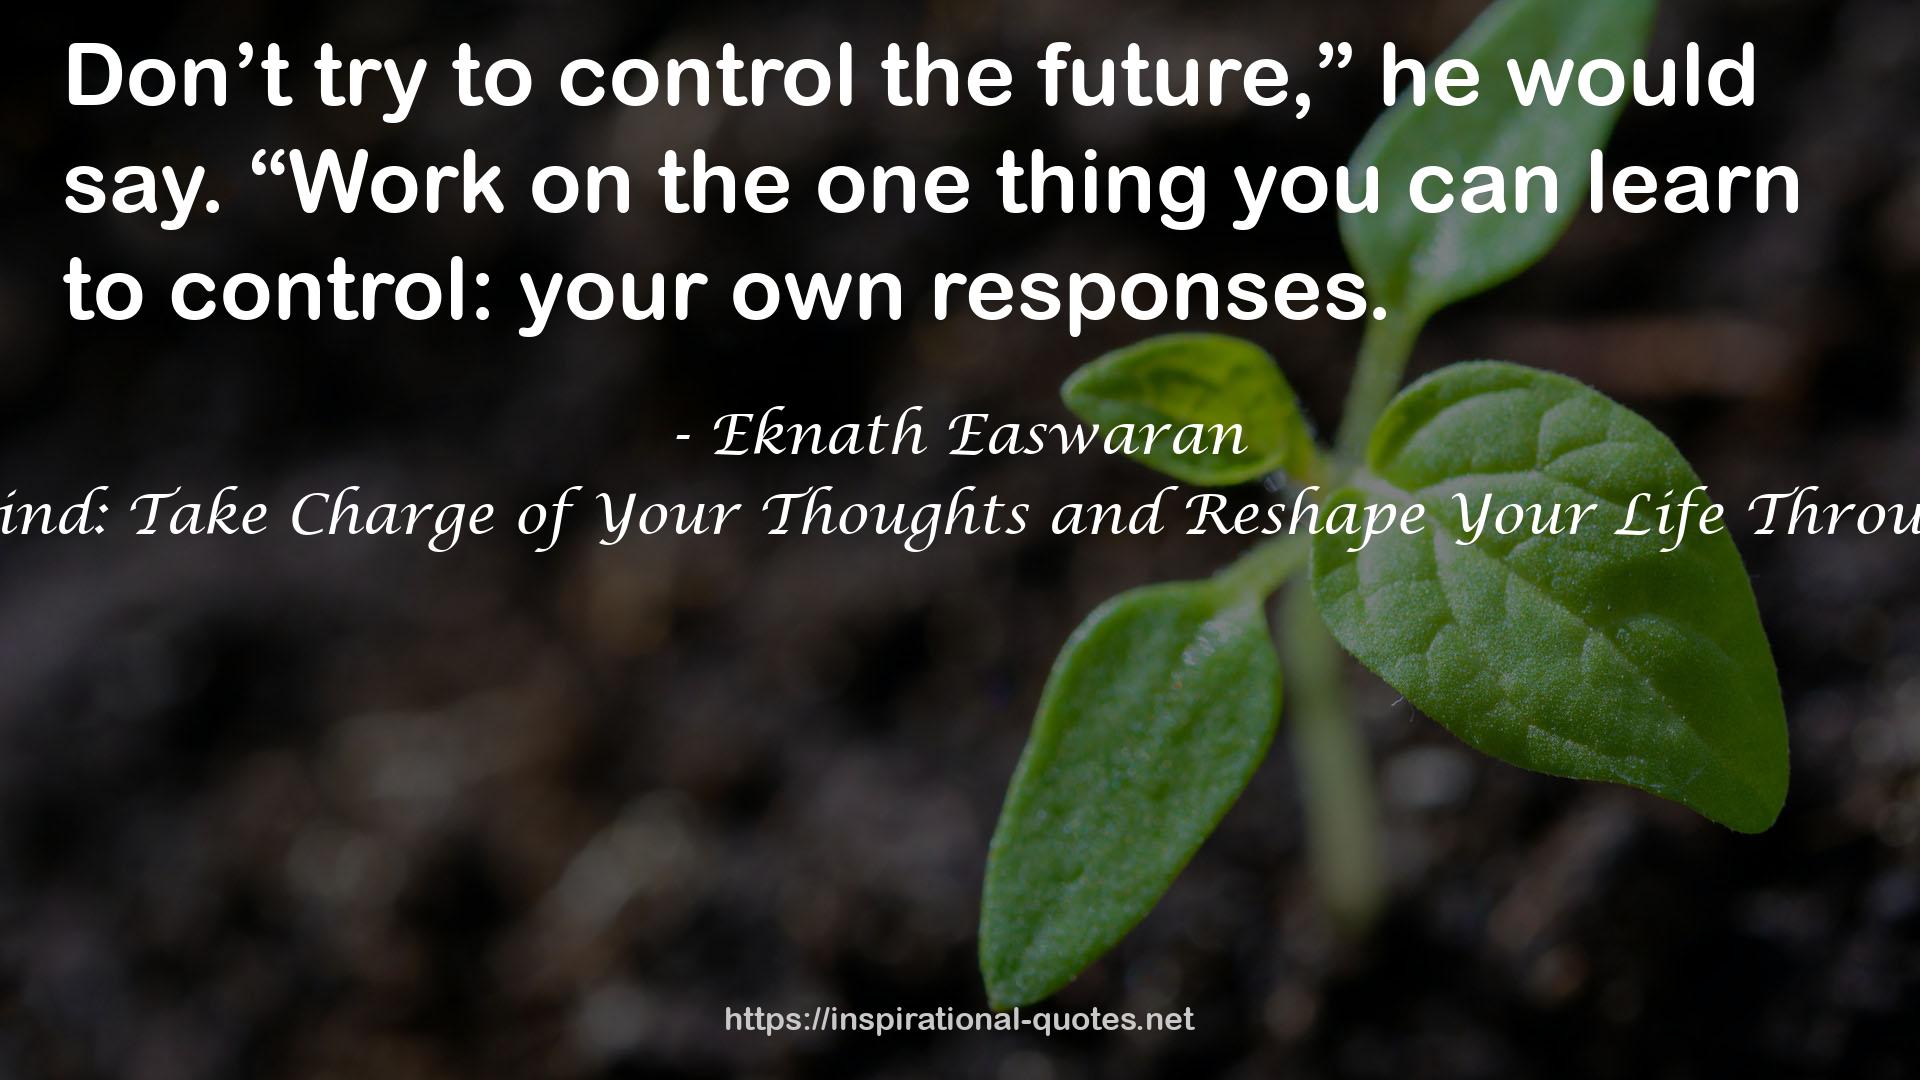 Conquest of Mind: Take Charge of Your Thoughts and Reshape Your Life Through Meditation QUOTES